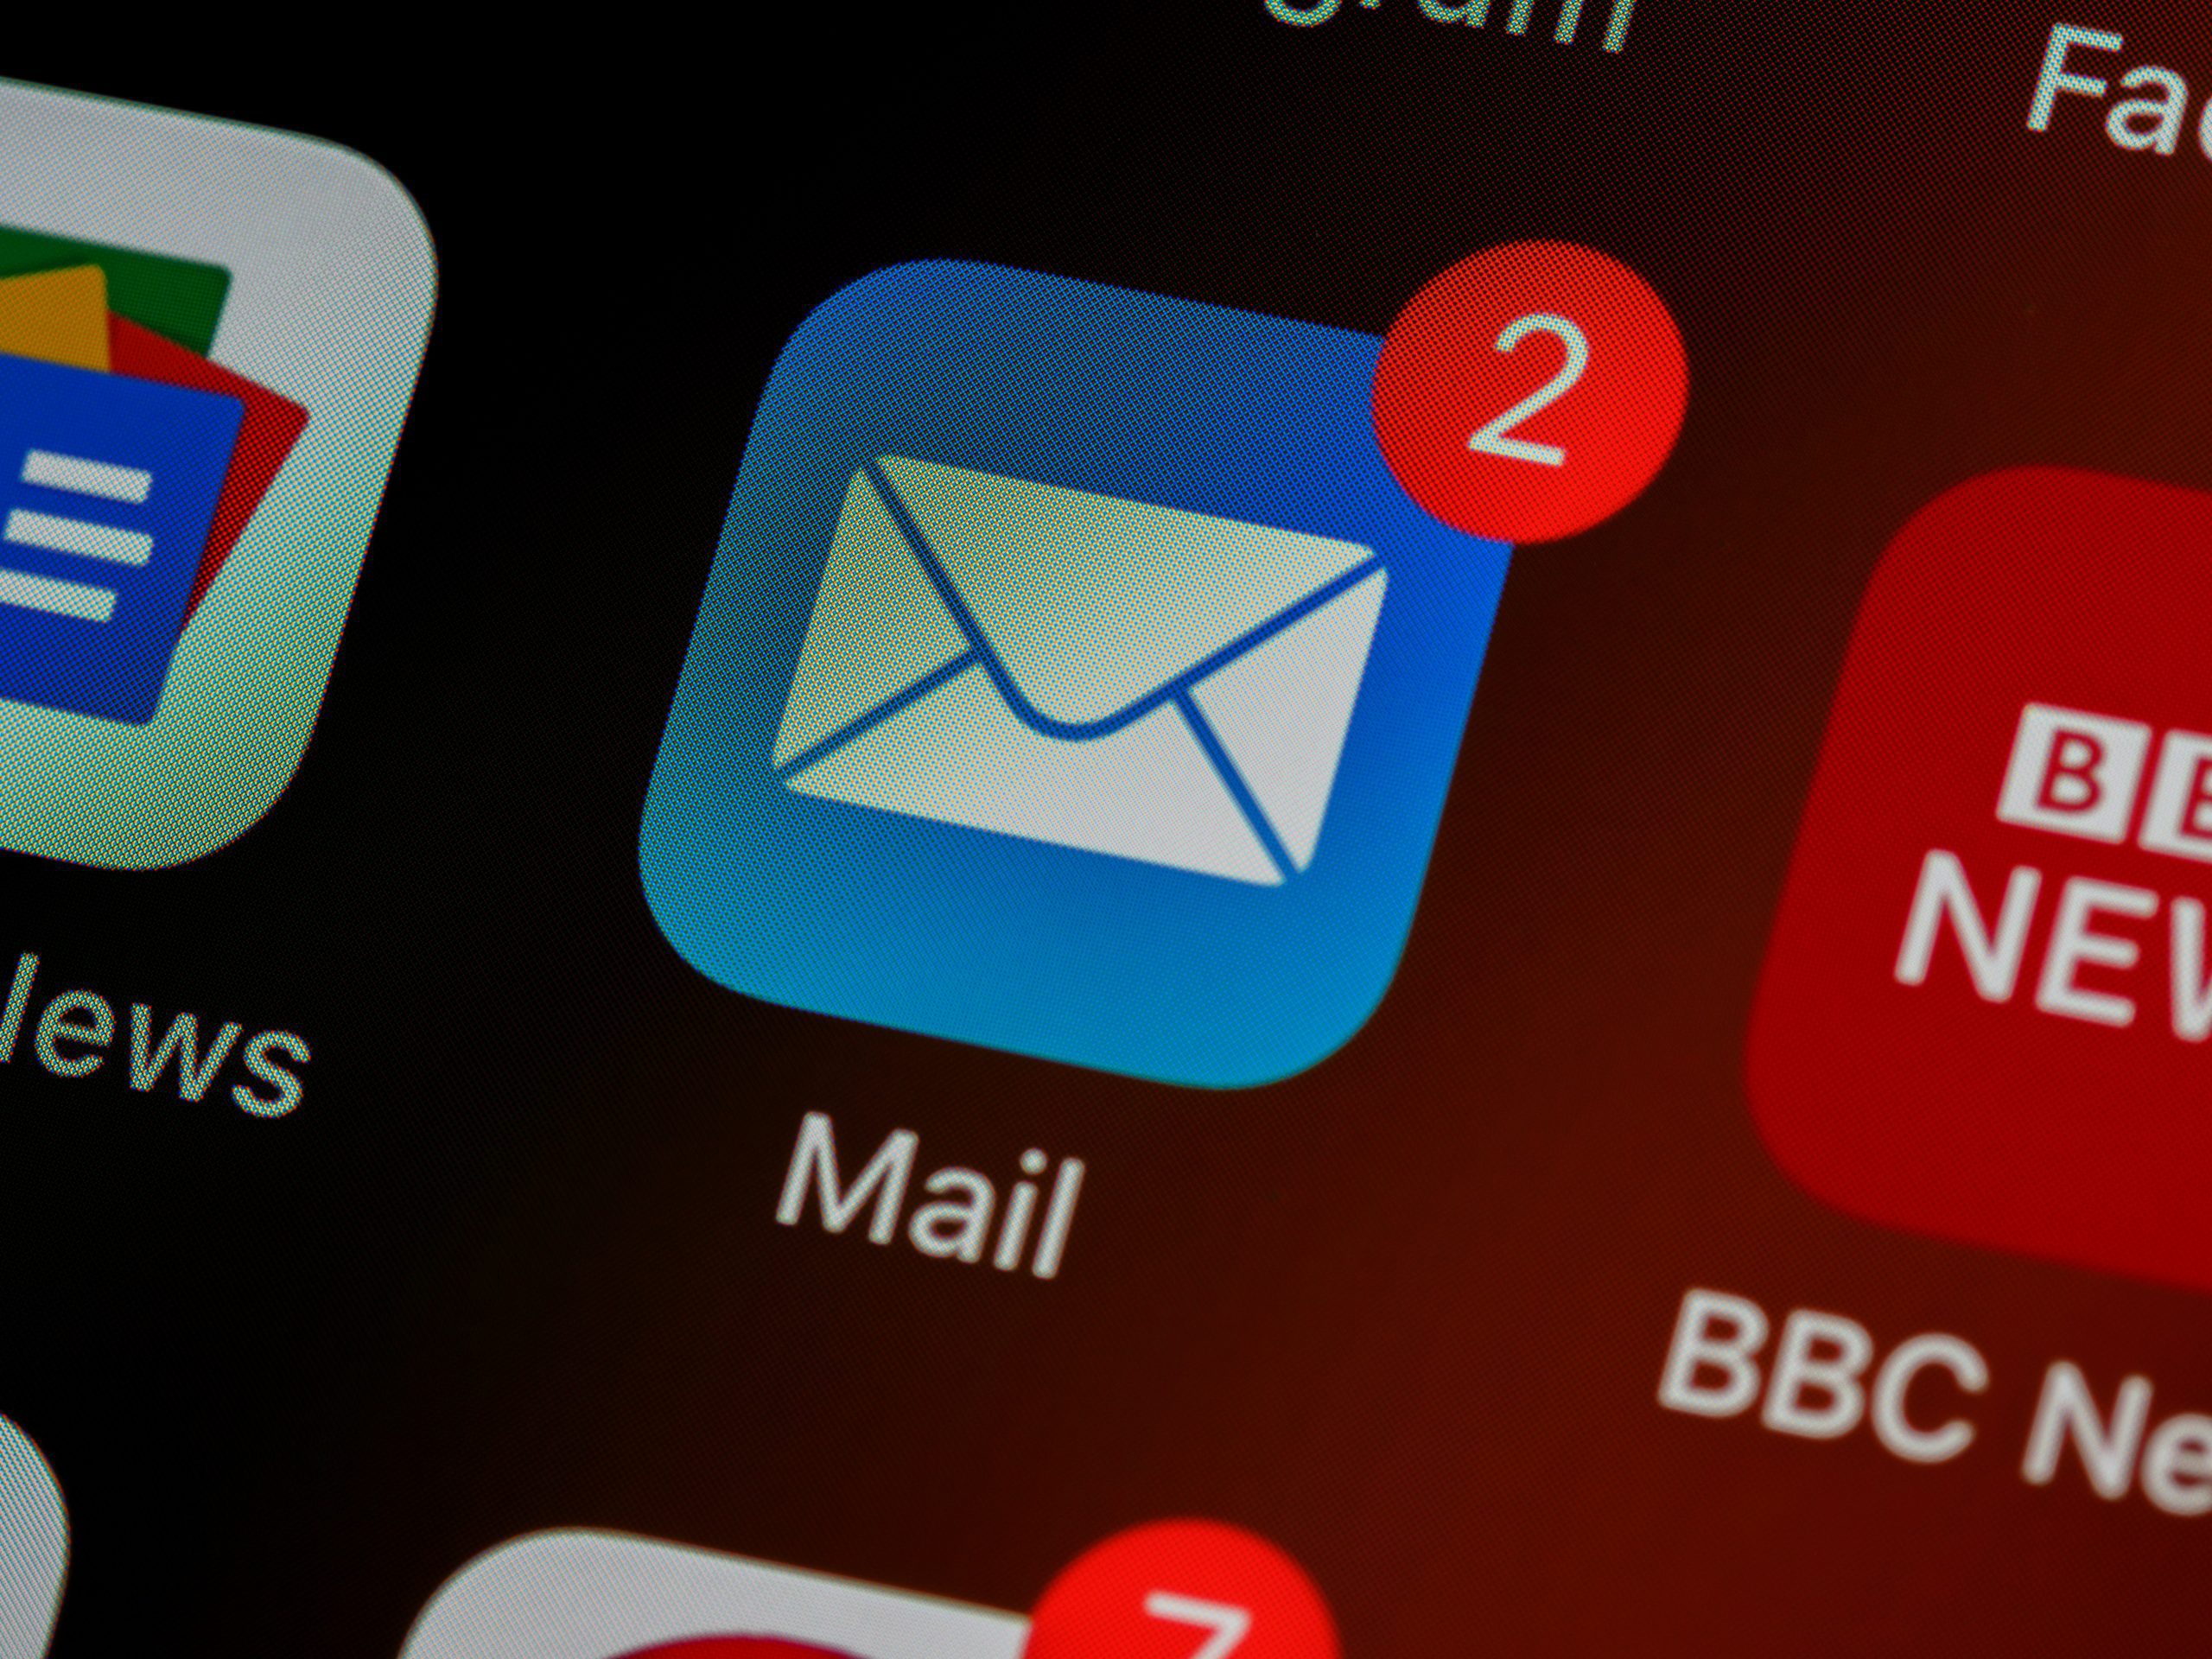 Cold emails to reach B2B targets should be short, coherent and targeted to your audience.